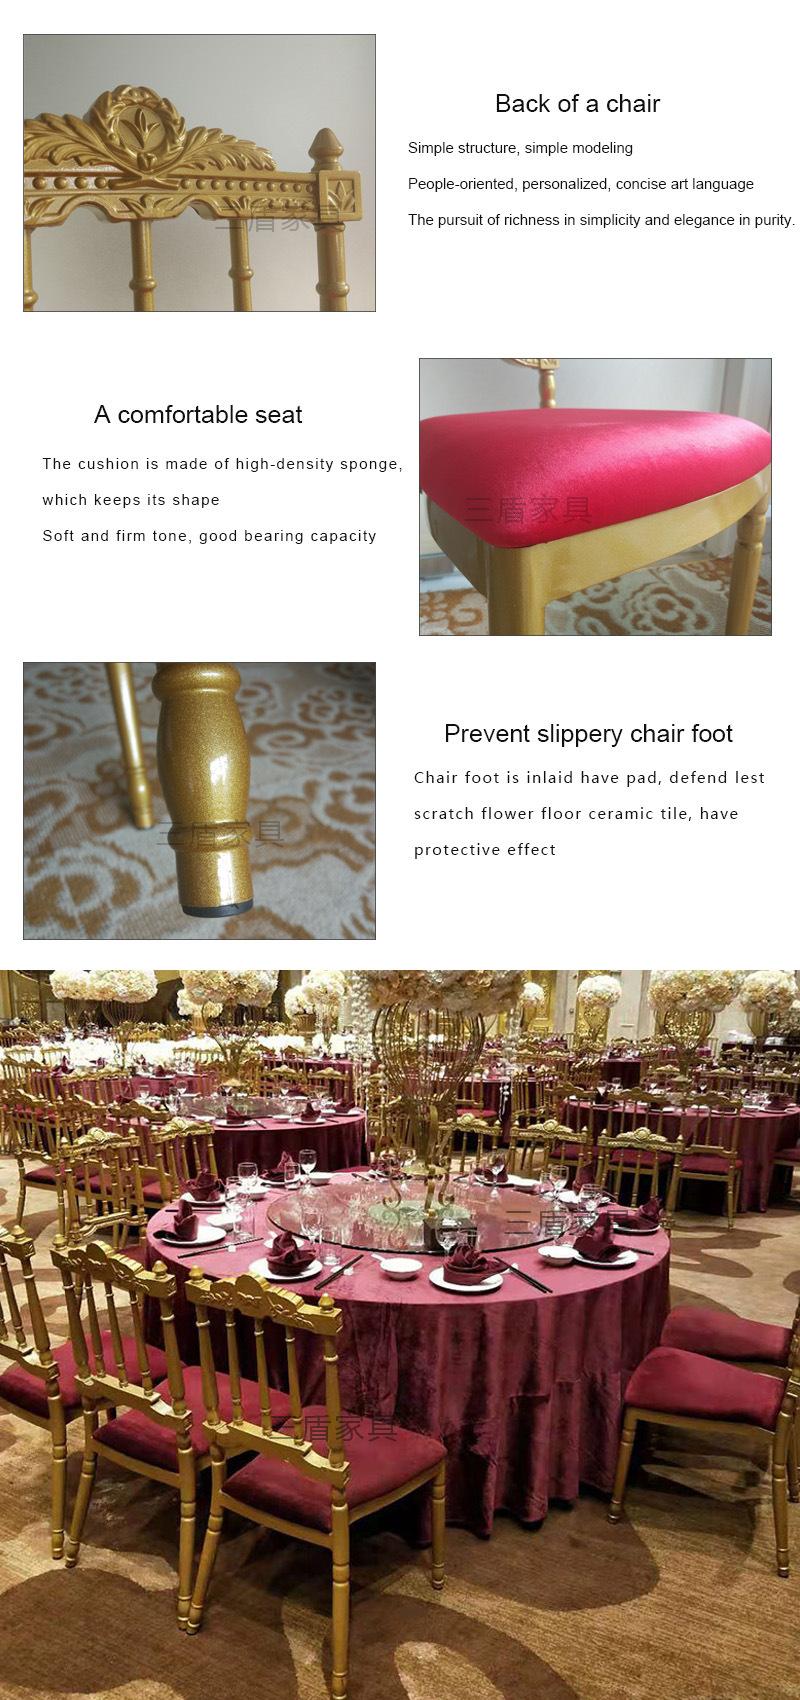 Hot Selling High End Metal Gold Painting Royal Crown Wedding Event Dining Chair